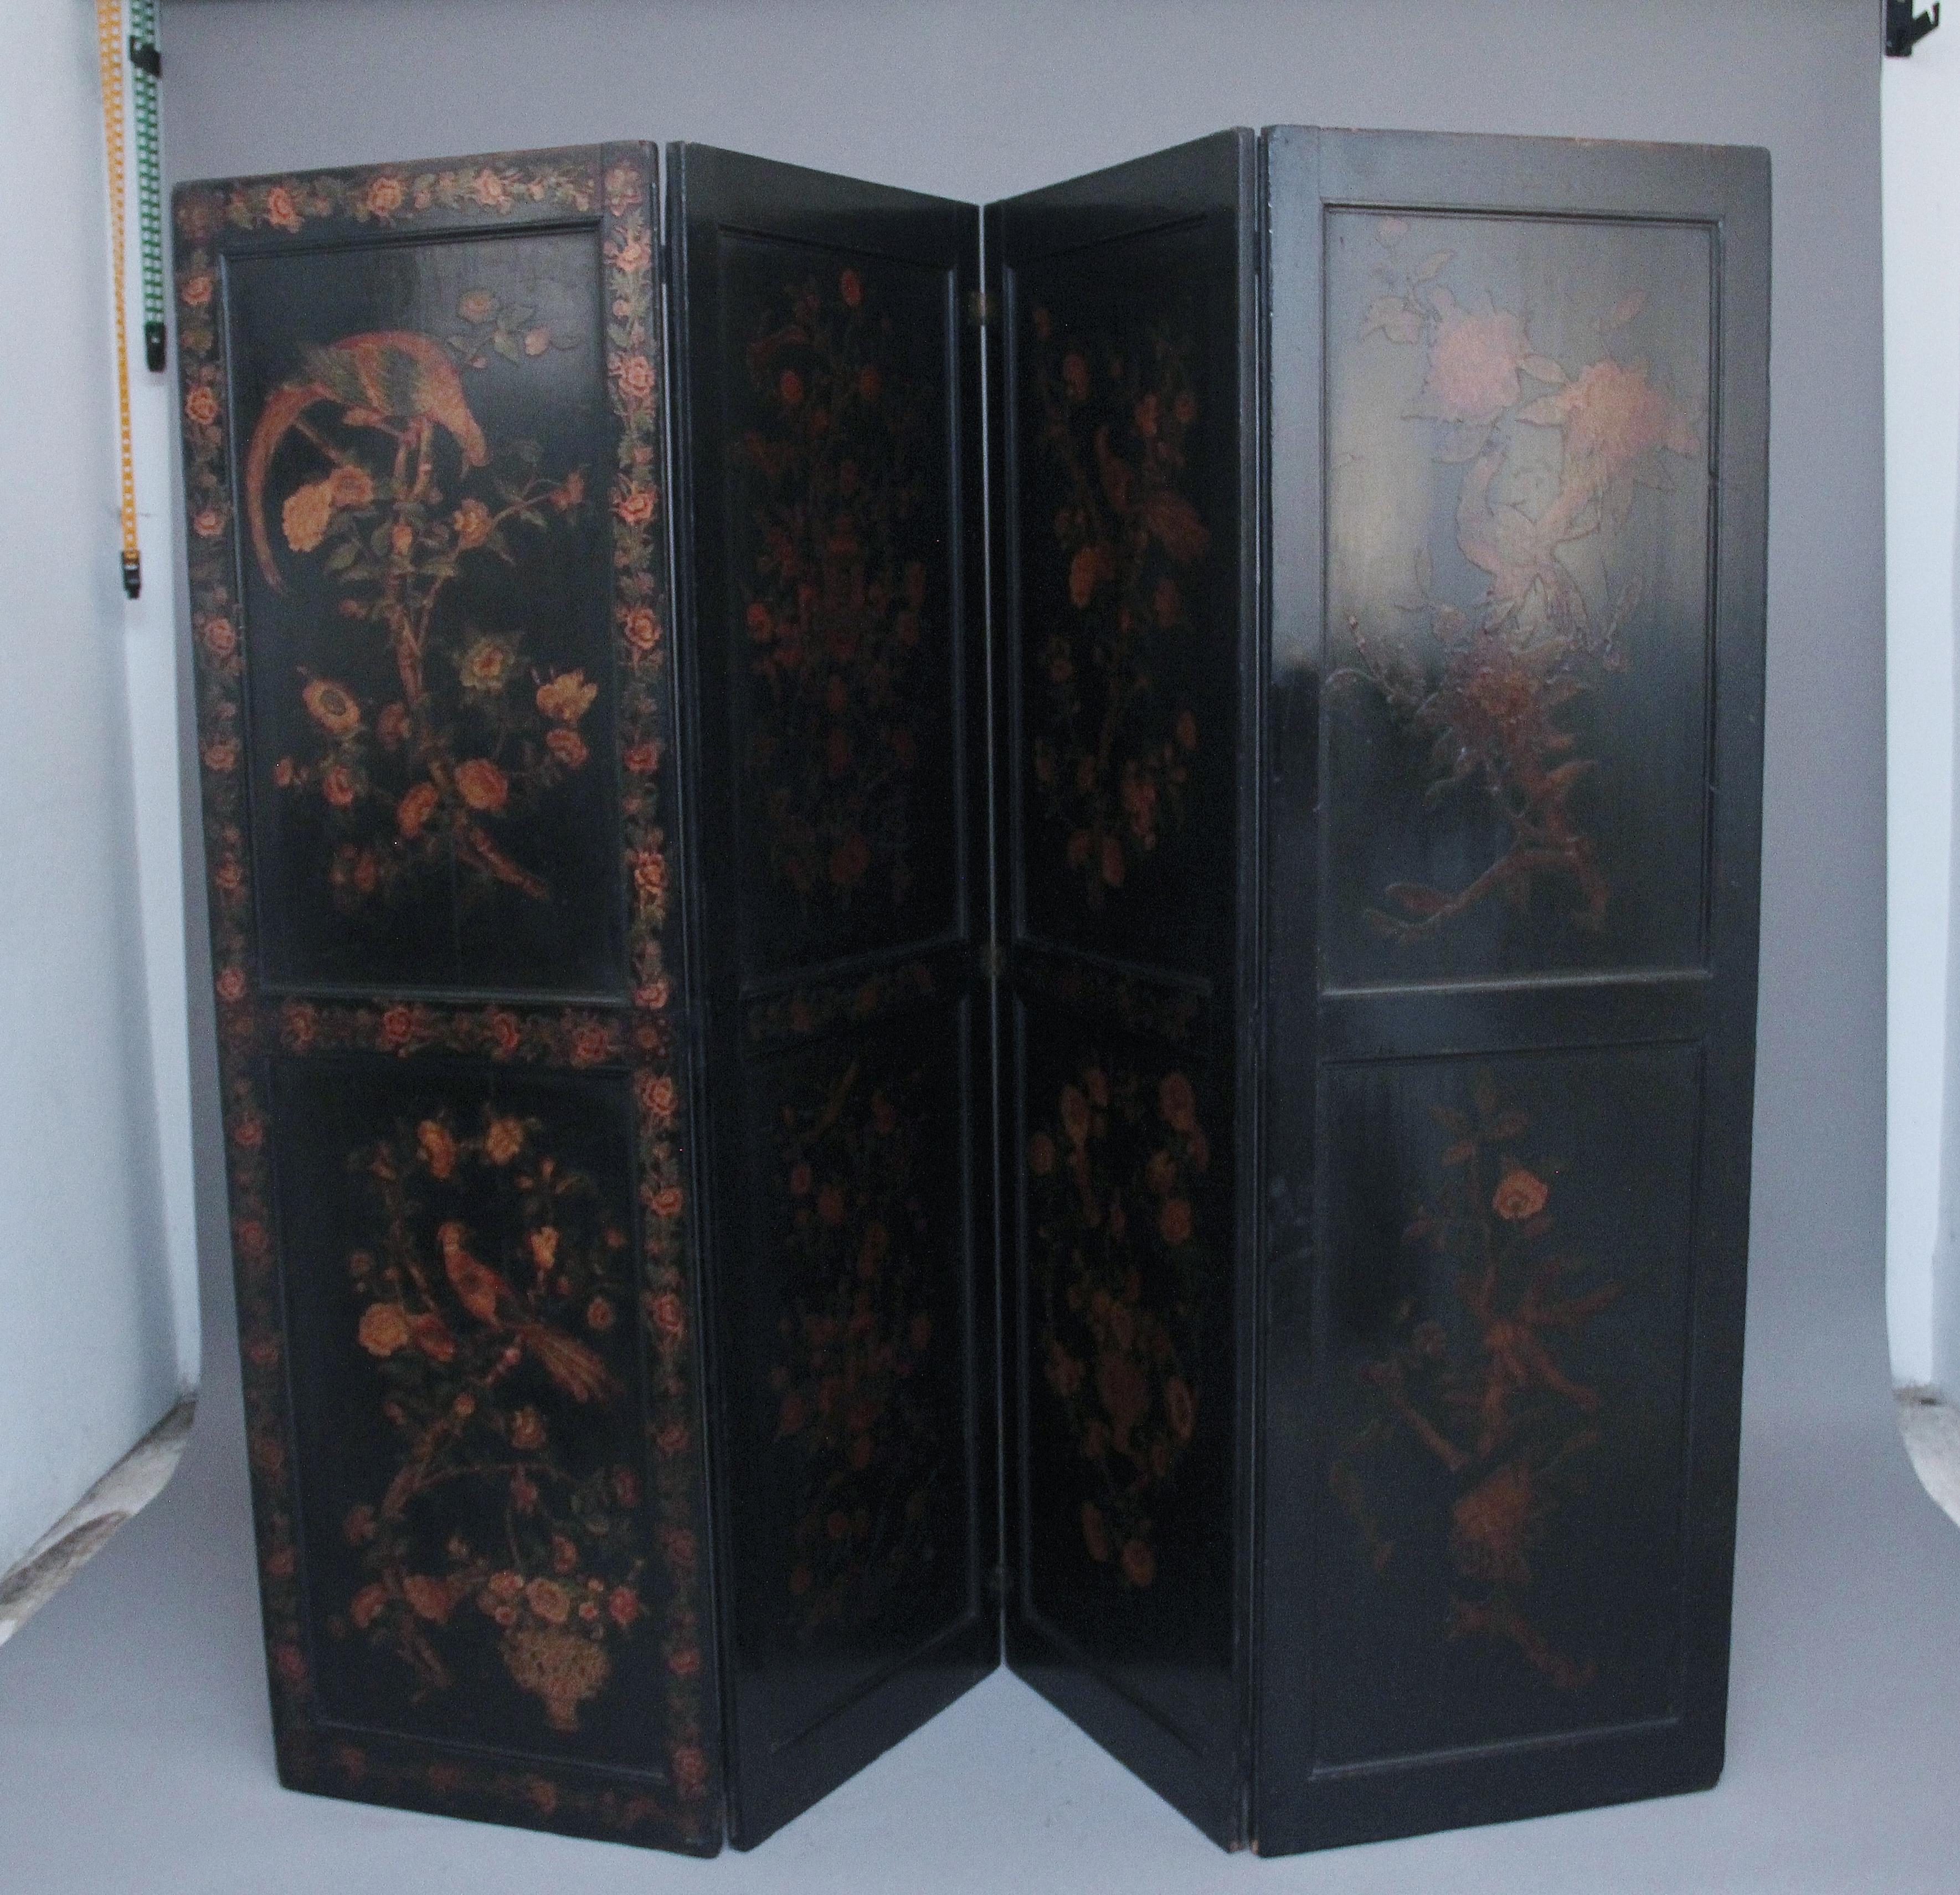 19th Century chinoiserie and black lacquered four panel screen, the screen has two panels on each of the four panels, and each panel depicts various birds and foliage, all in very good condition and highly decorative. The screen has hinges on each